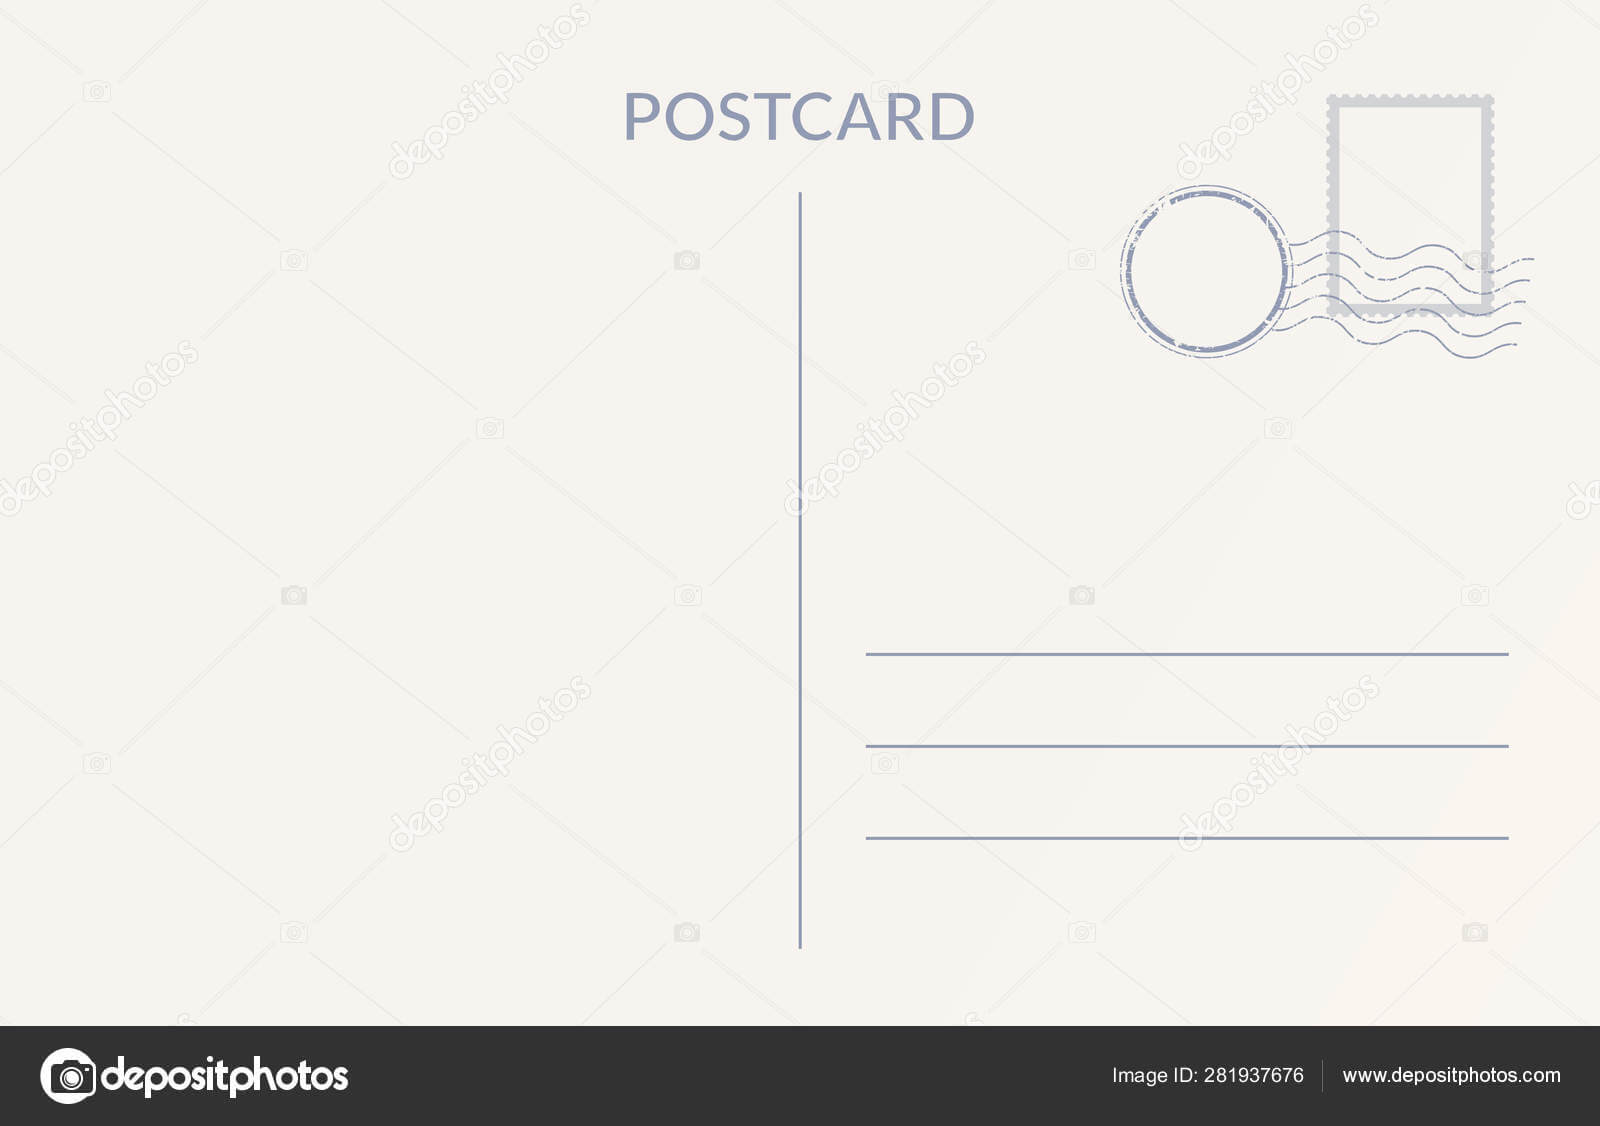 Empty Postcard Template. Design Of Blank Post Card Back Intended For Post Cards Template